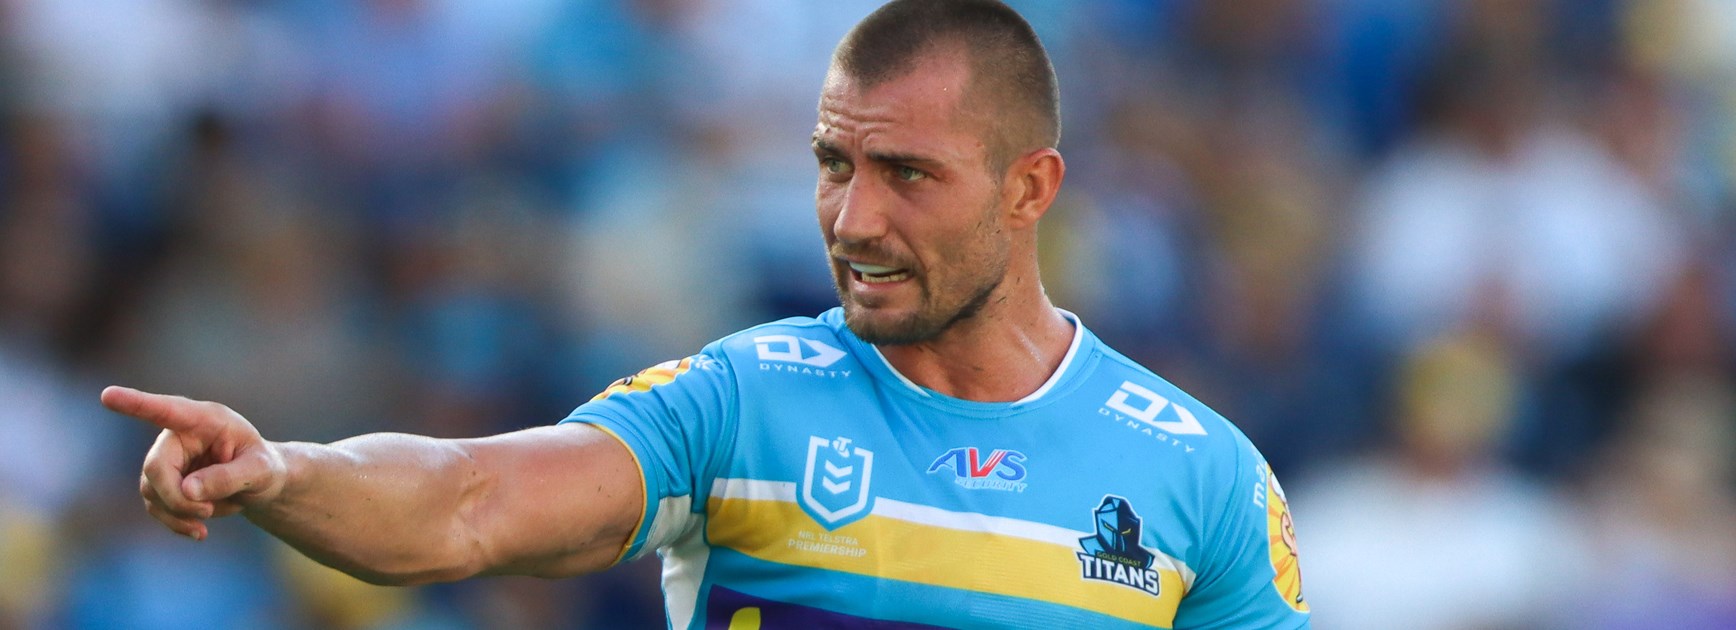 'Heard a lot about it': Foran excited to experience new derby